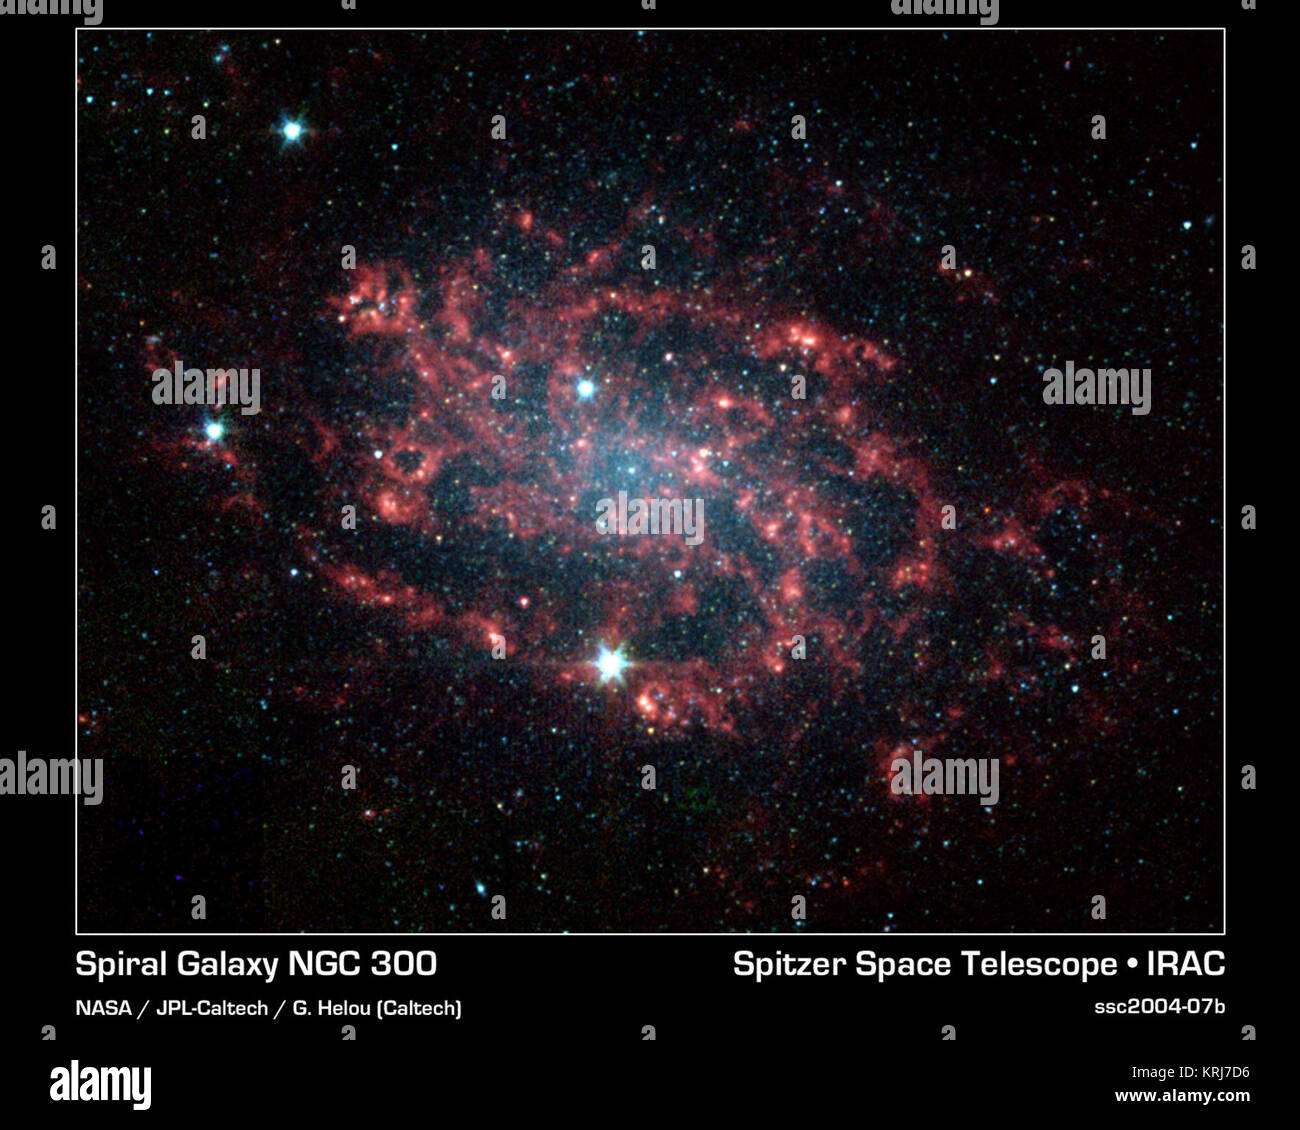 Sometimes, the best way to understand how something works is to take it apart. The same is true for galaxies like NGC 300, which NASA's Spitzer Space Telescope has divided into its various parts. NGC 300 is a face-on spiral galaxy located 7.5 million light-years away in the southern constellation Sculptor.  This false-color image taken by the infrared array camera on Spitzer readily distinguishes the main star component of the galaxy (blue) from its dusty spiral arms (red). The star distribution peaks strongly in the central bulge where older stars congregate, and tapers off along the arms whe Stock Photo